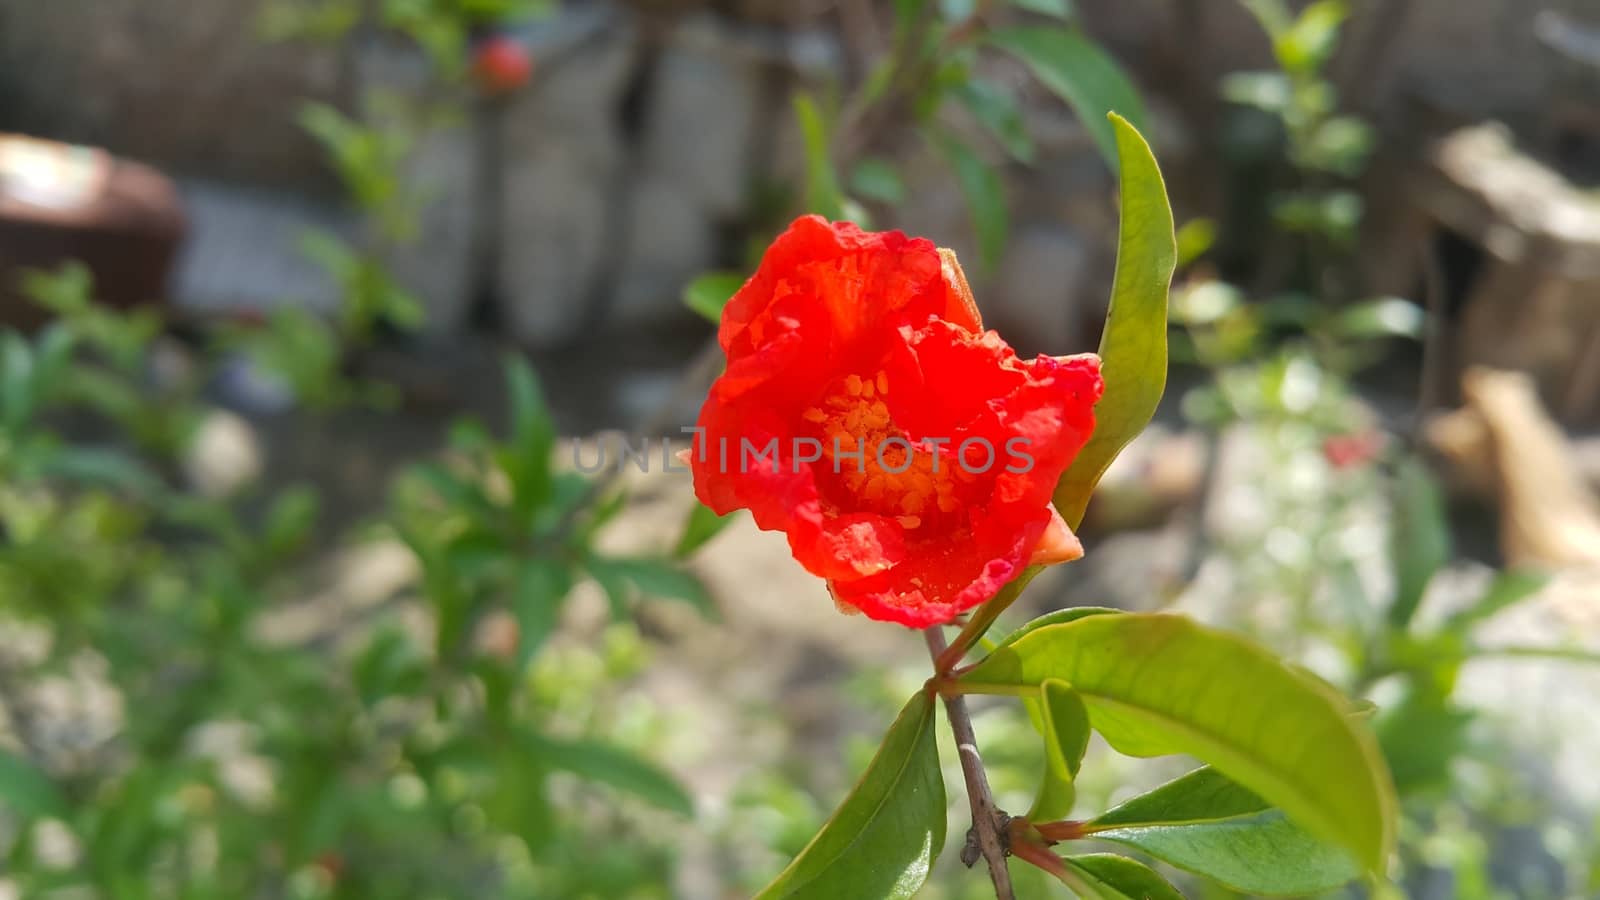 Closeup with selective focus on red flower with stamens and green leaves in background